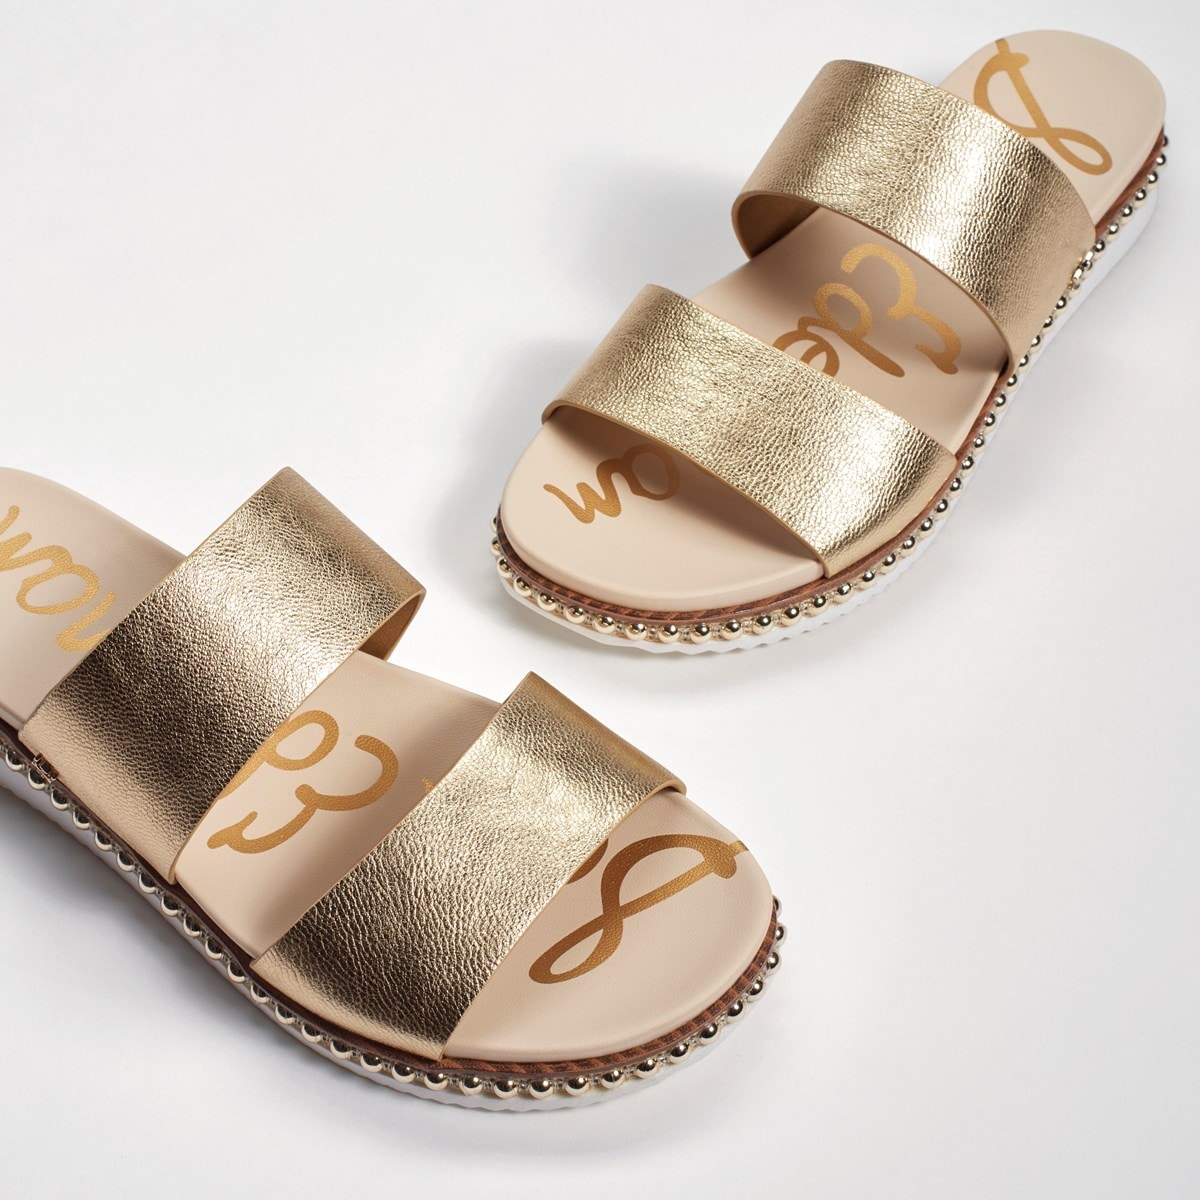 sparkle slippers womens